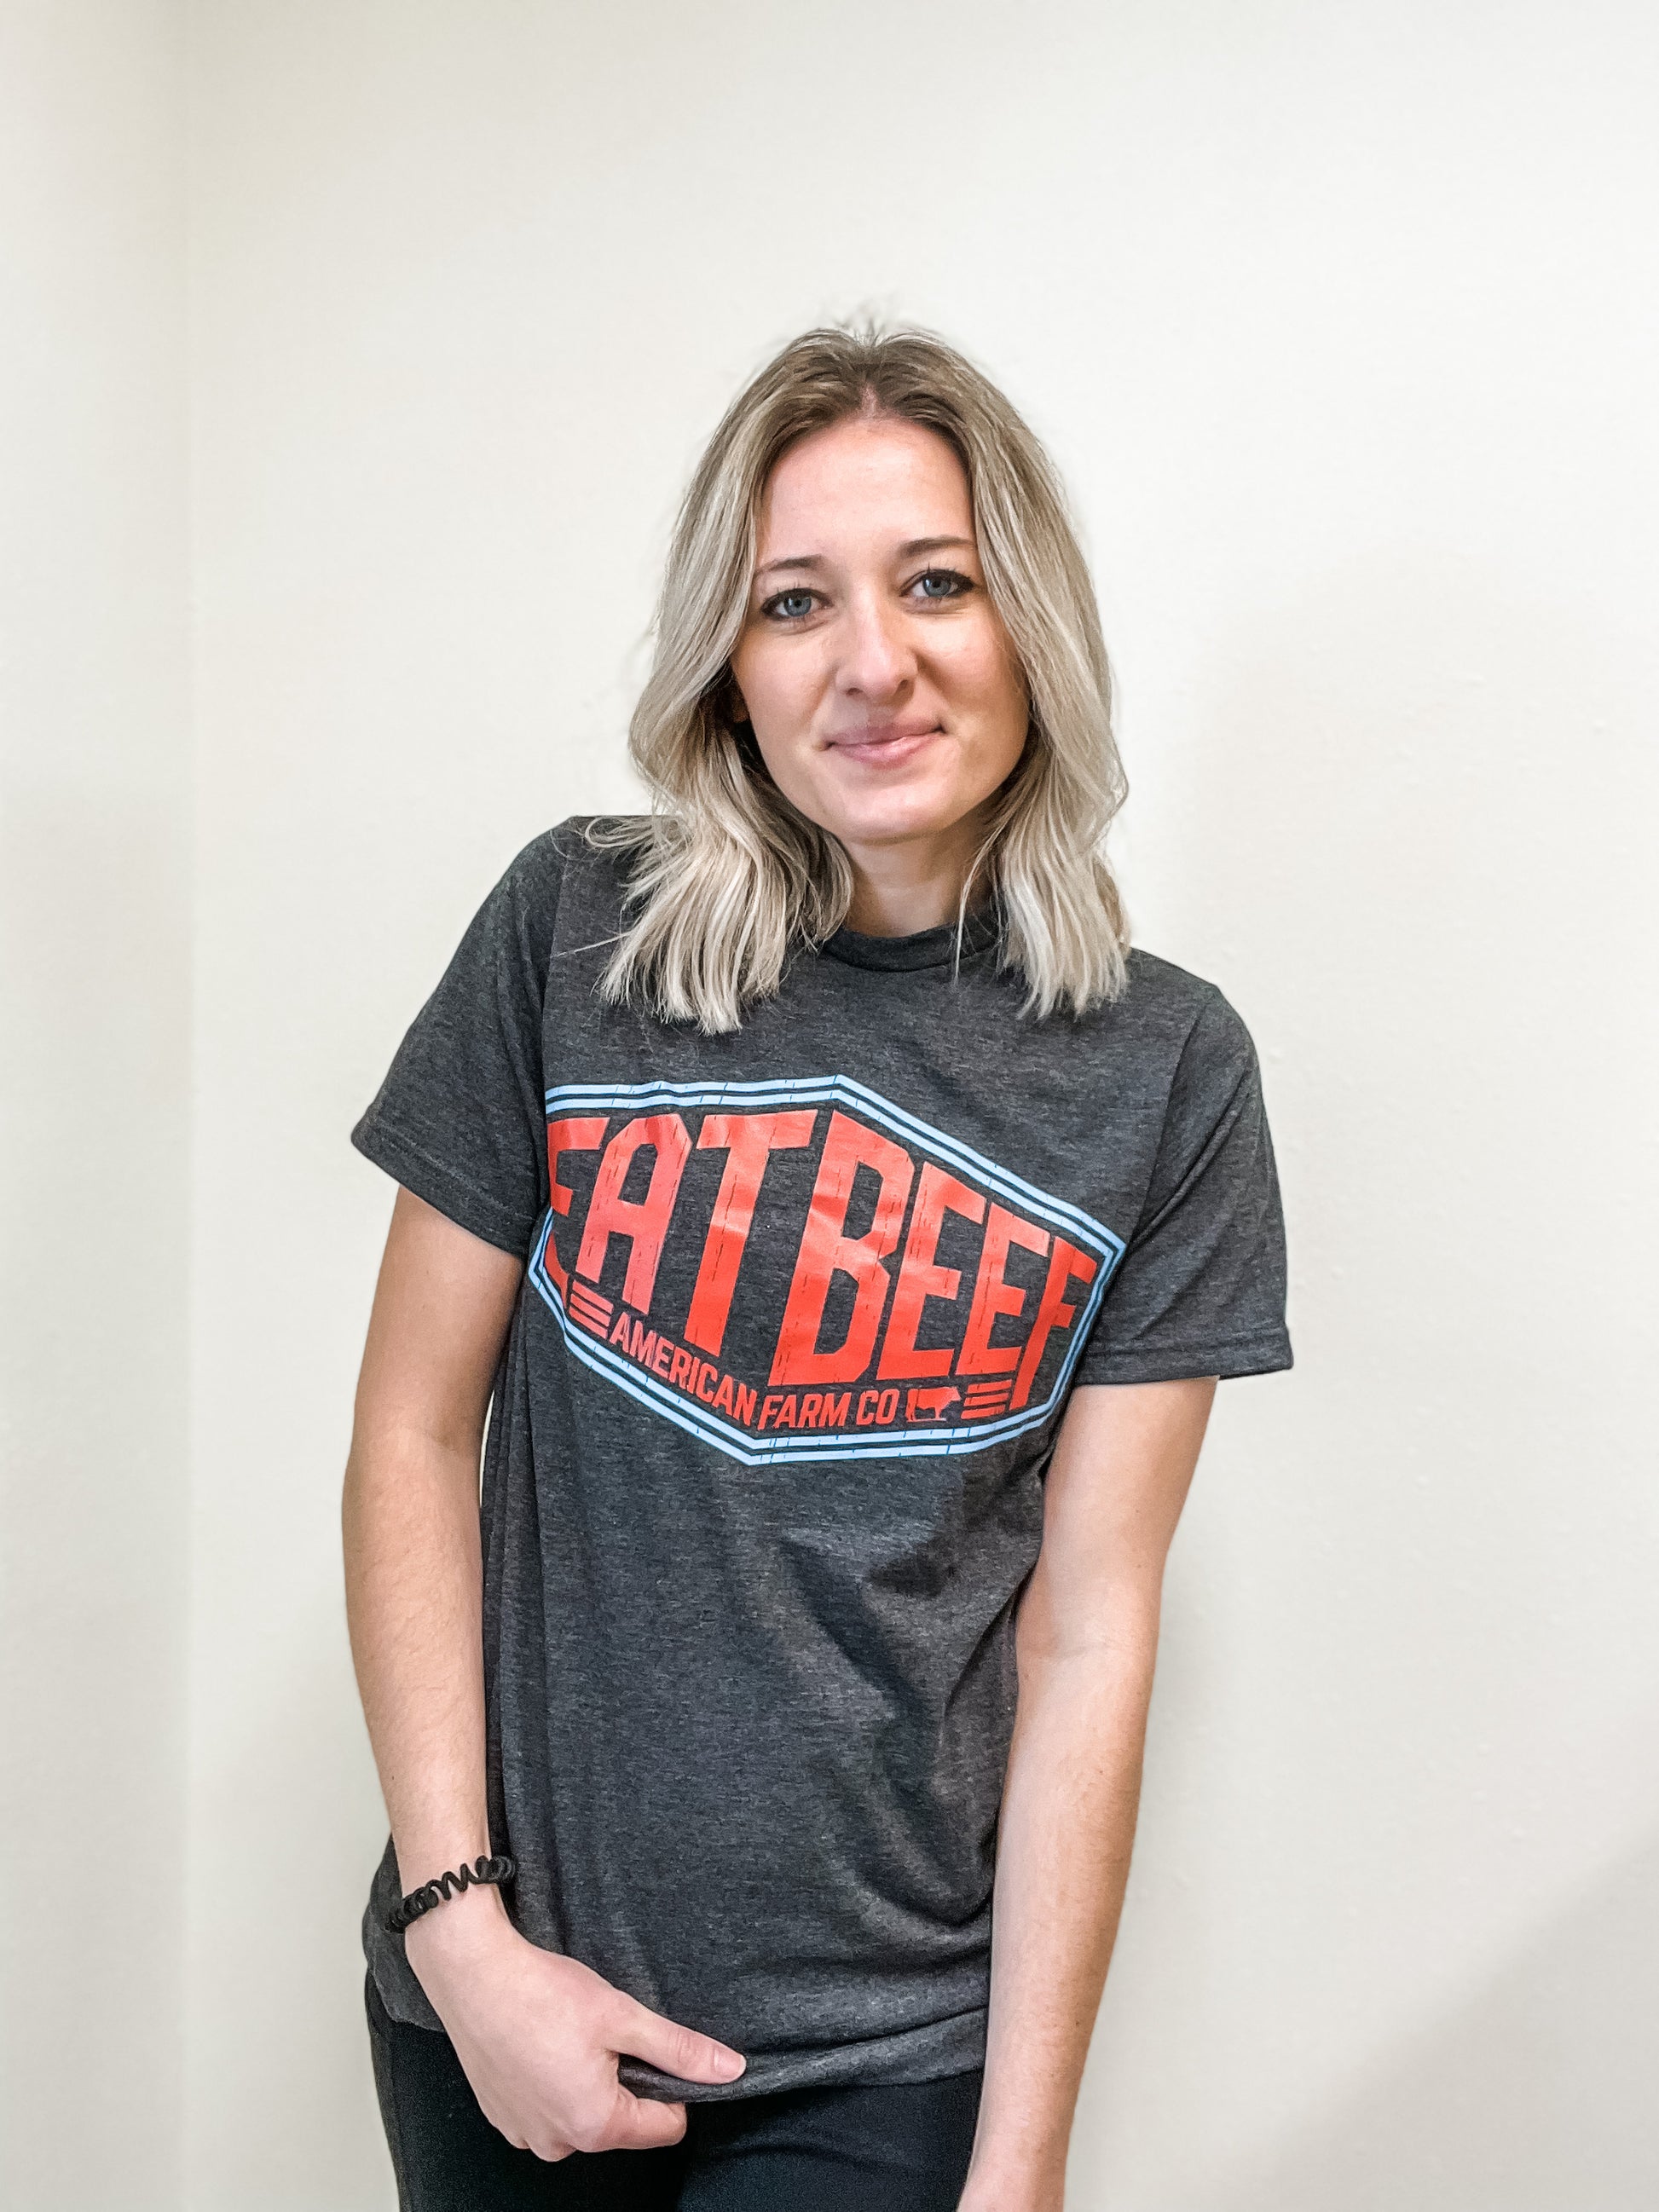 A women wearing a Eat More Beef Sign tshirt against the wall